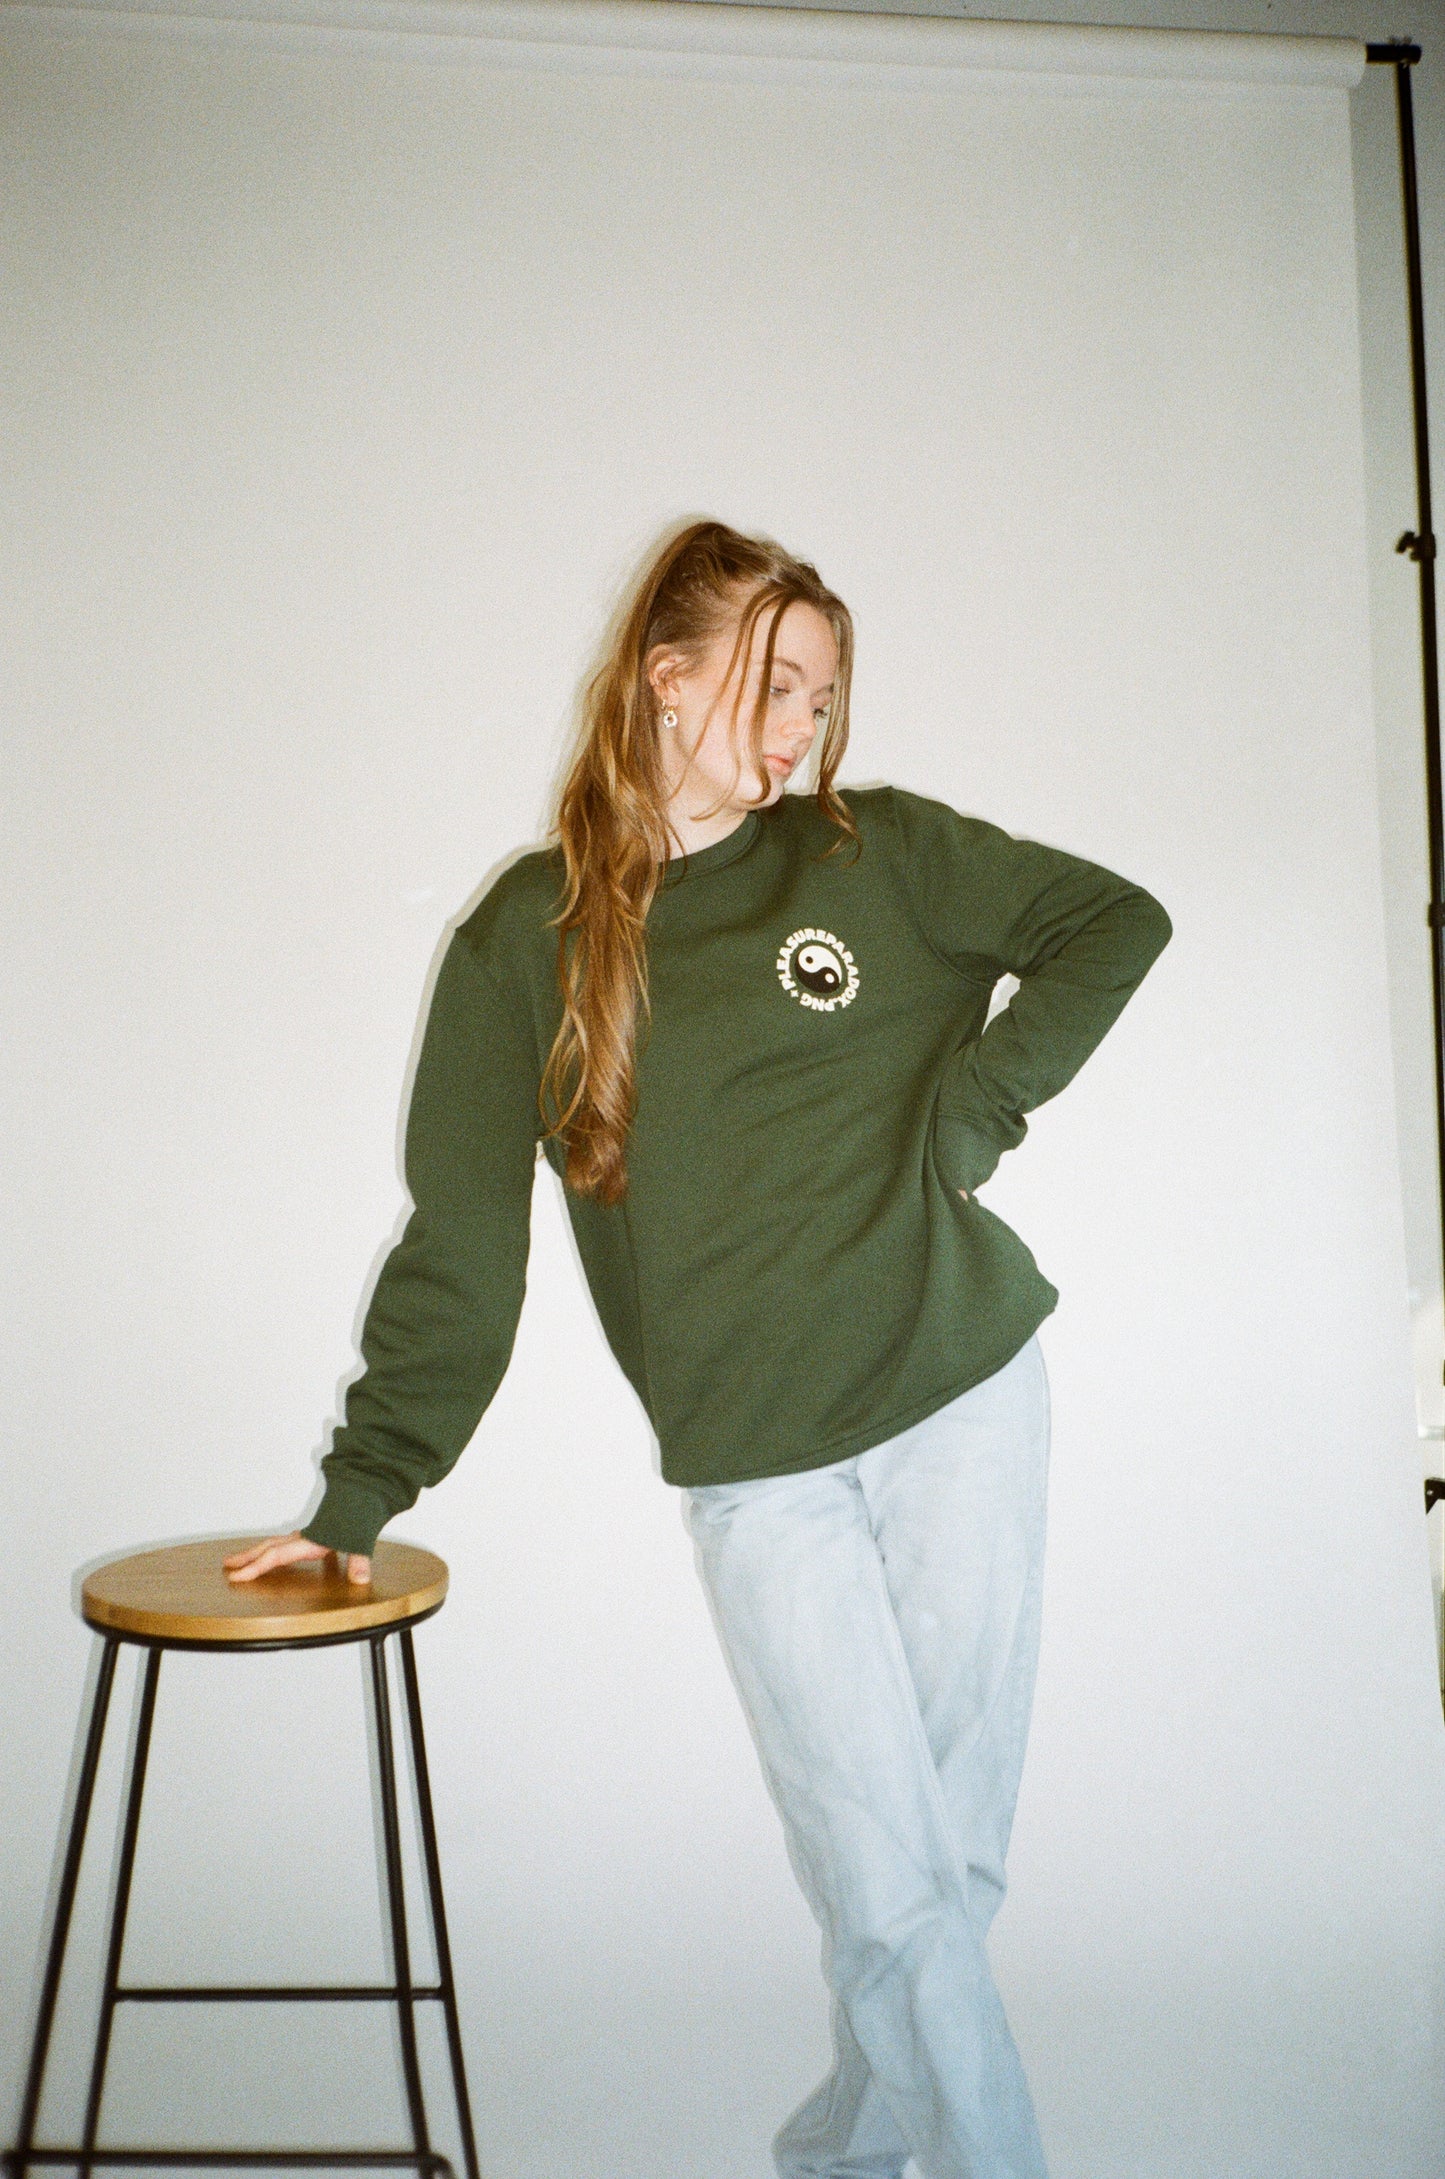 Load image into Gallery viewer, Pleasure Paradox &amp;#39;How You See Yourself&amp;#39; Sweater - Bottle Green
